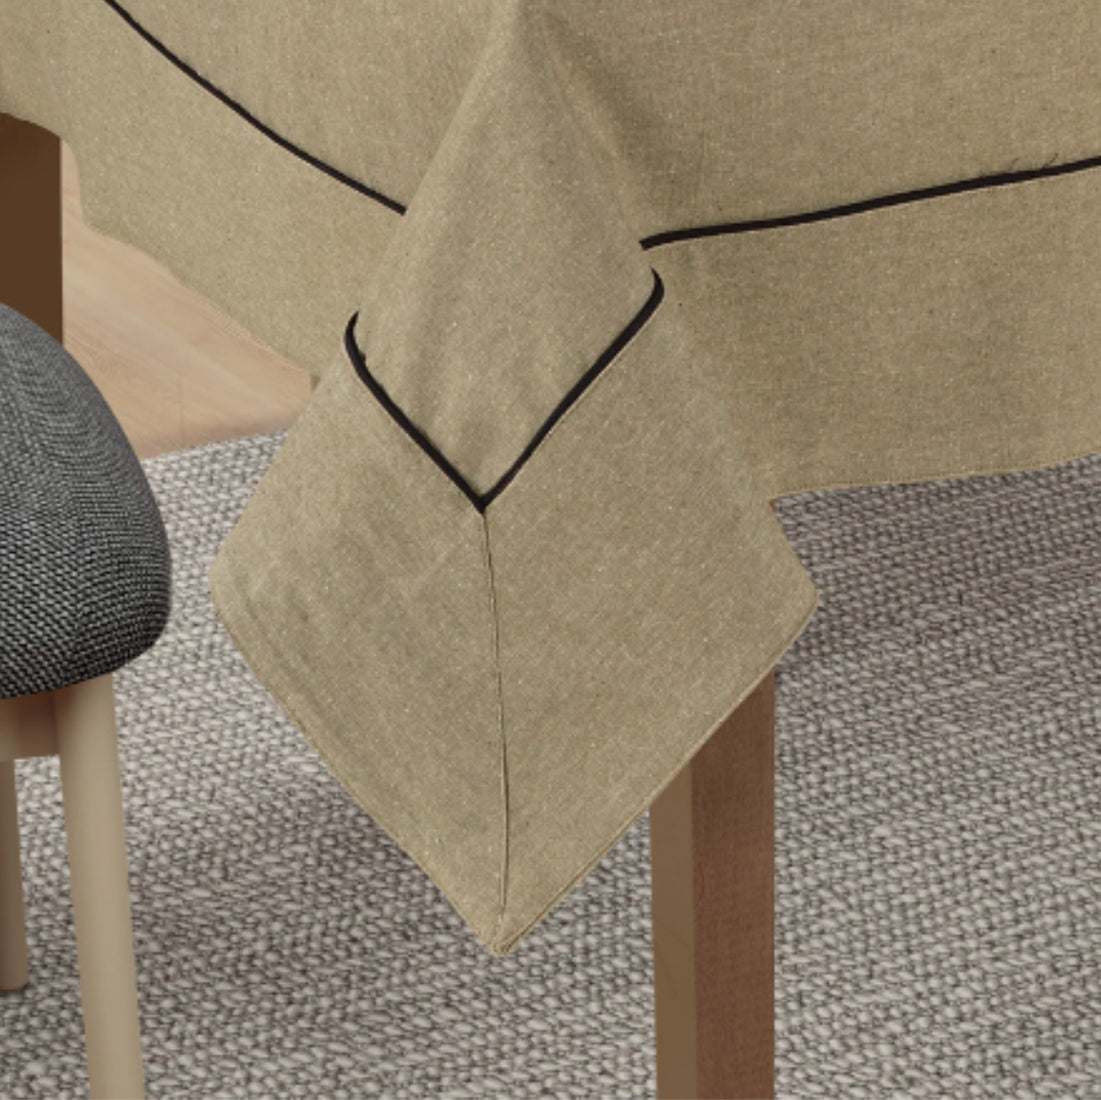 VIRGO Woven Cotton Plain Table Cover - Taupe Natural